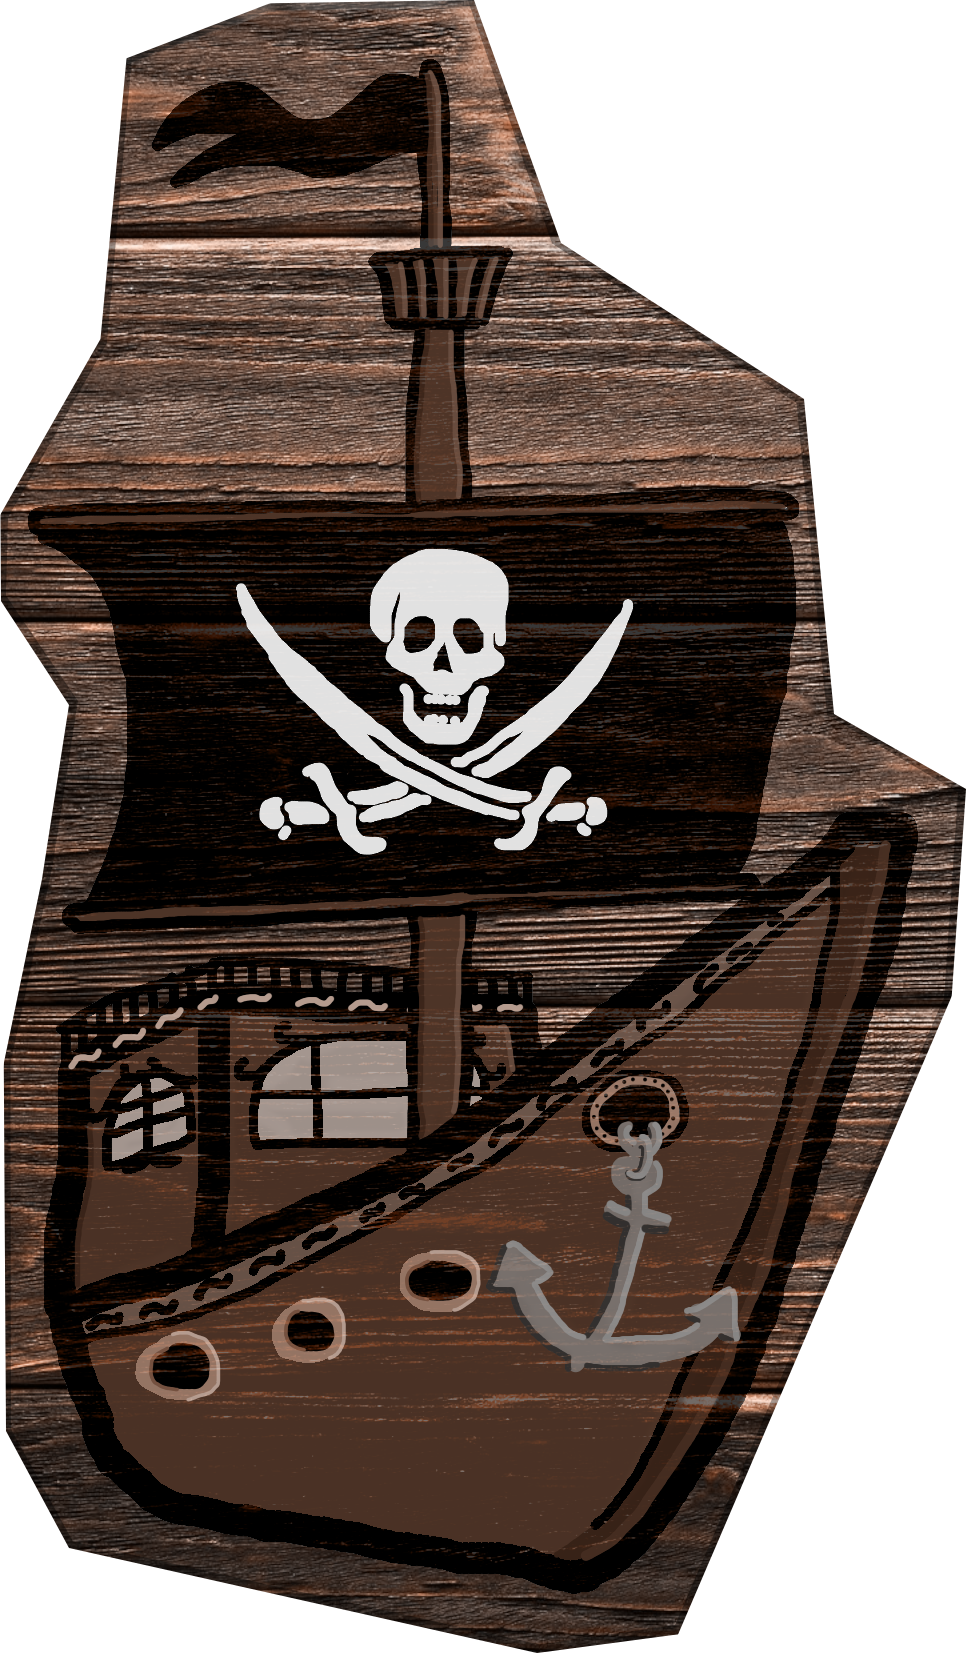 Pirate ship drawn on a pice of wood